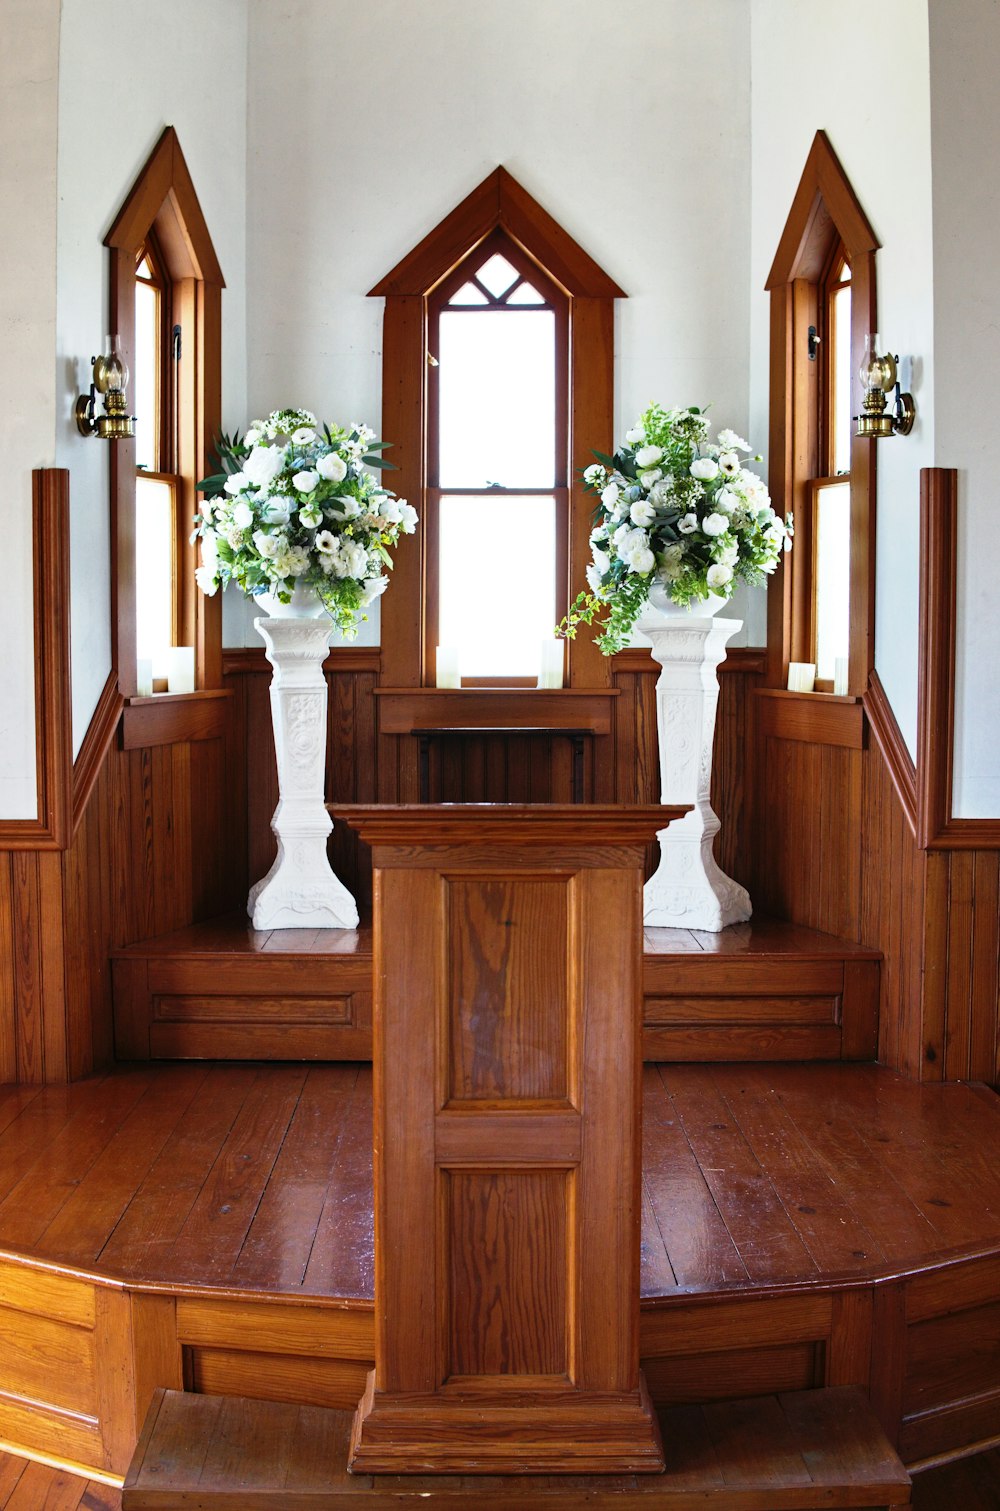 a church with wooden steps and flowers in vases